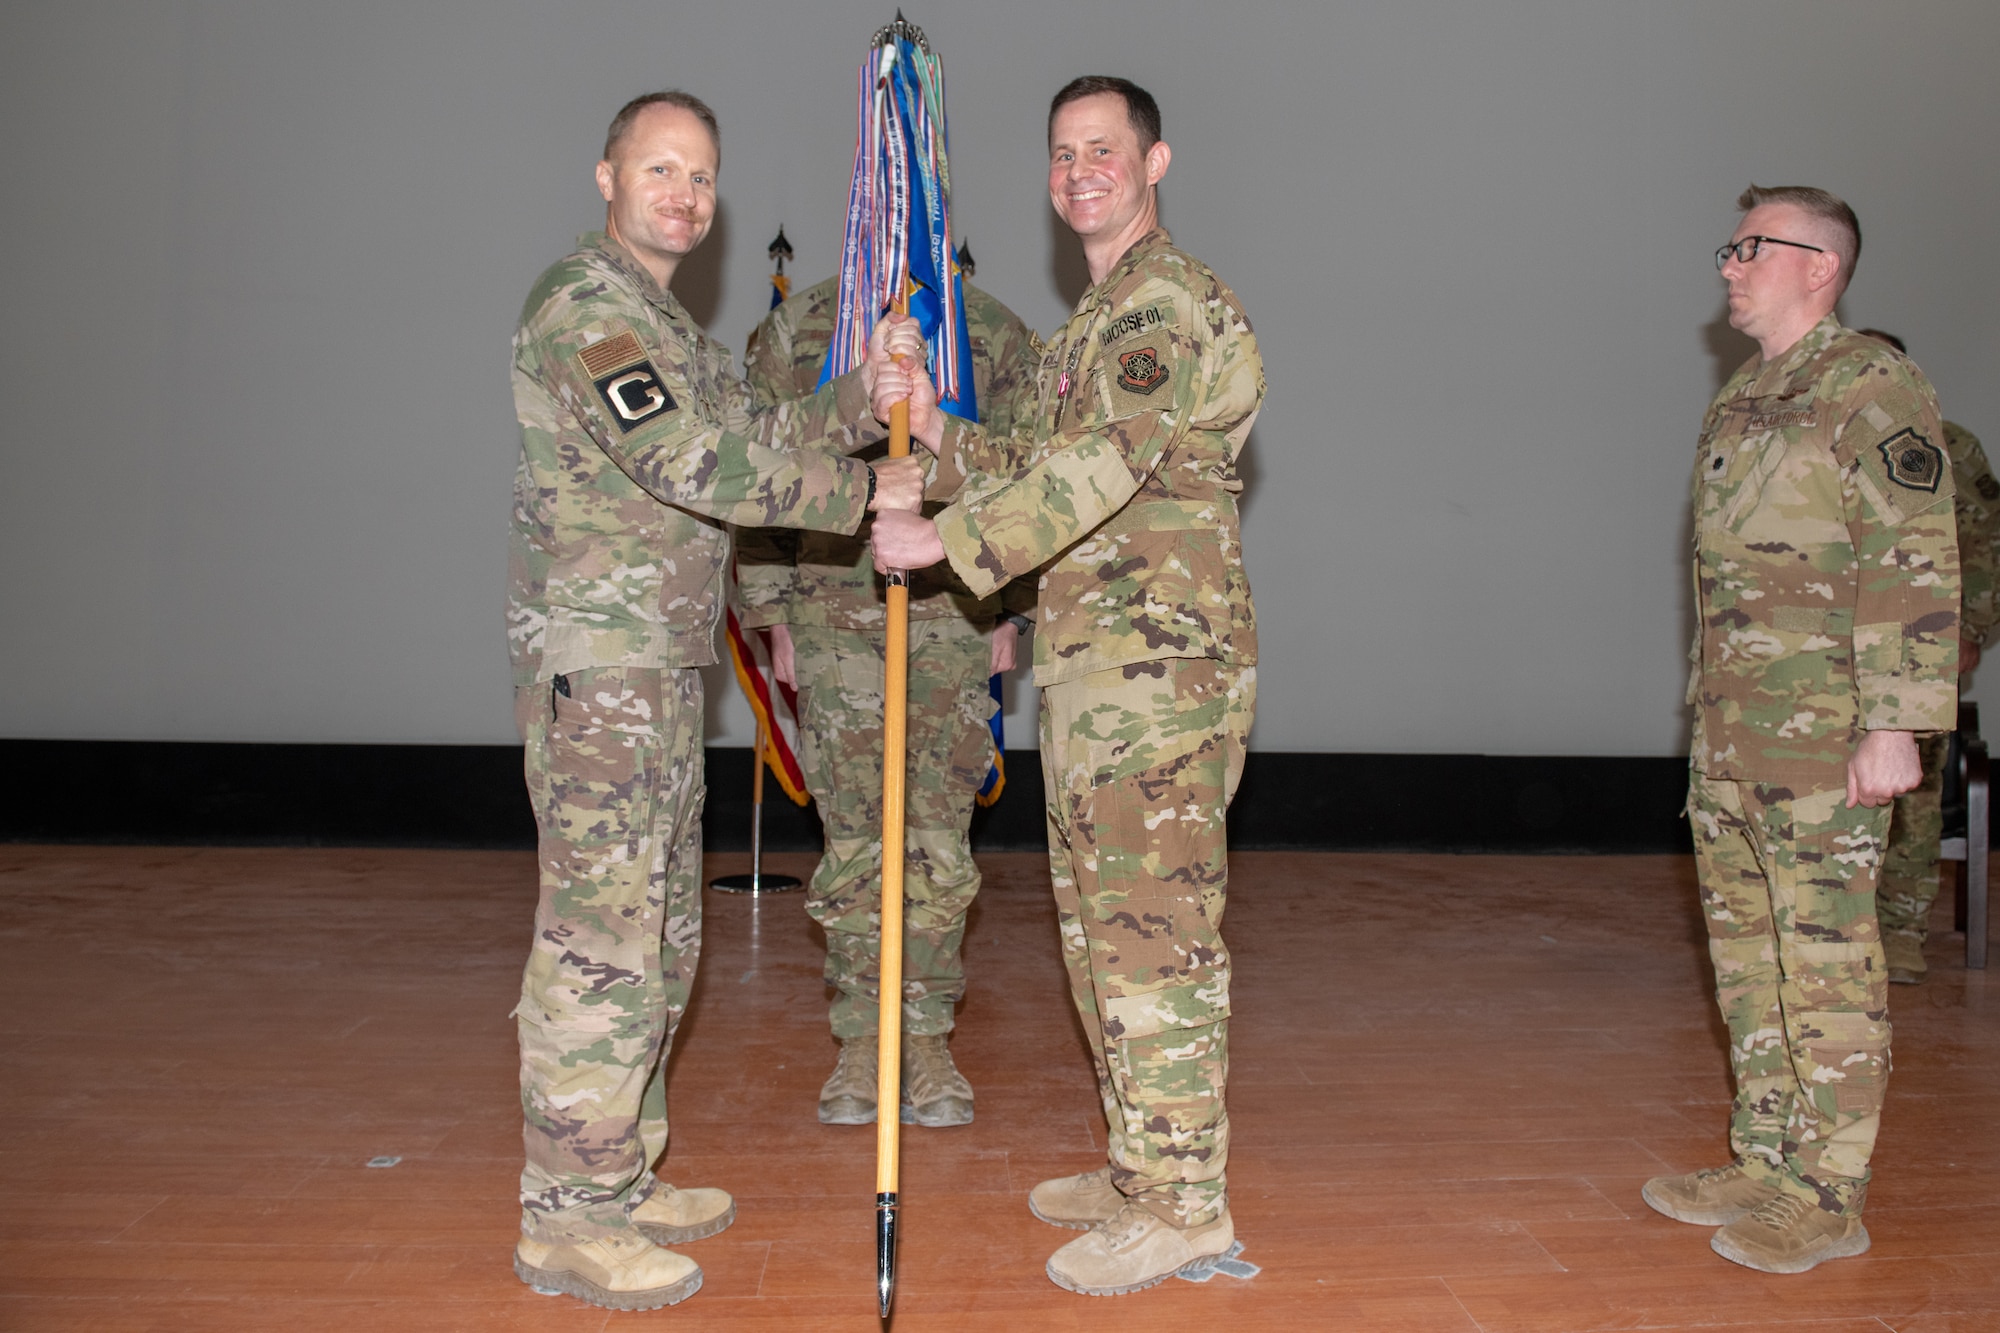 U.S. Air Force Lt. Col. Patrick McLaughlin relinquishes command of the 816th Expeditionary Airlift Squadron during a change of command ceremony on Al Udeid Air Base, Qatar, May 2, 2022. McLaughlin was also awarded the Meritorious Service Medal.